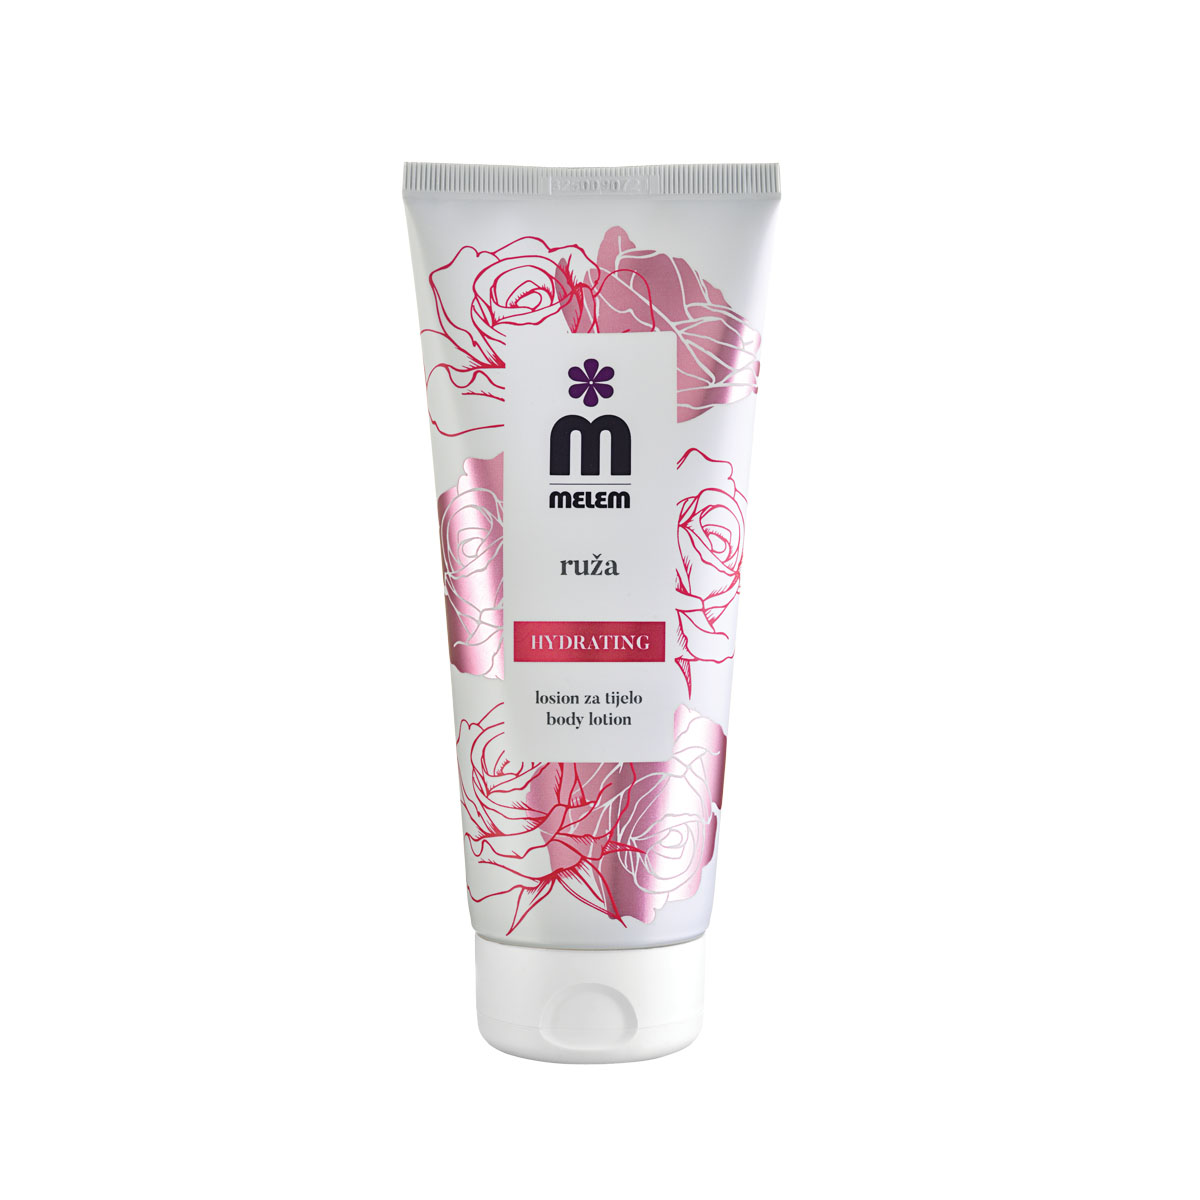 Melem body lotion with a rose 200 ml